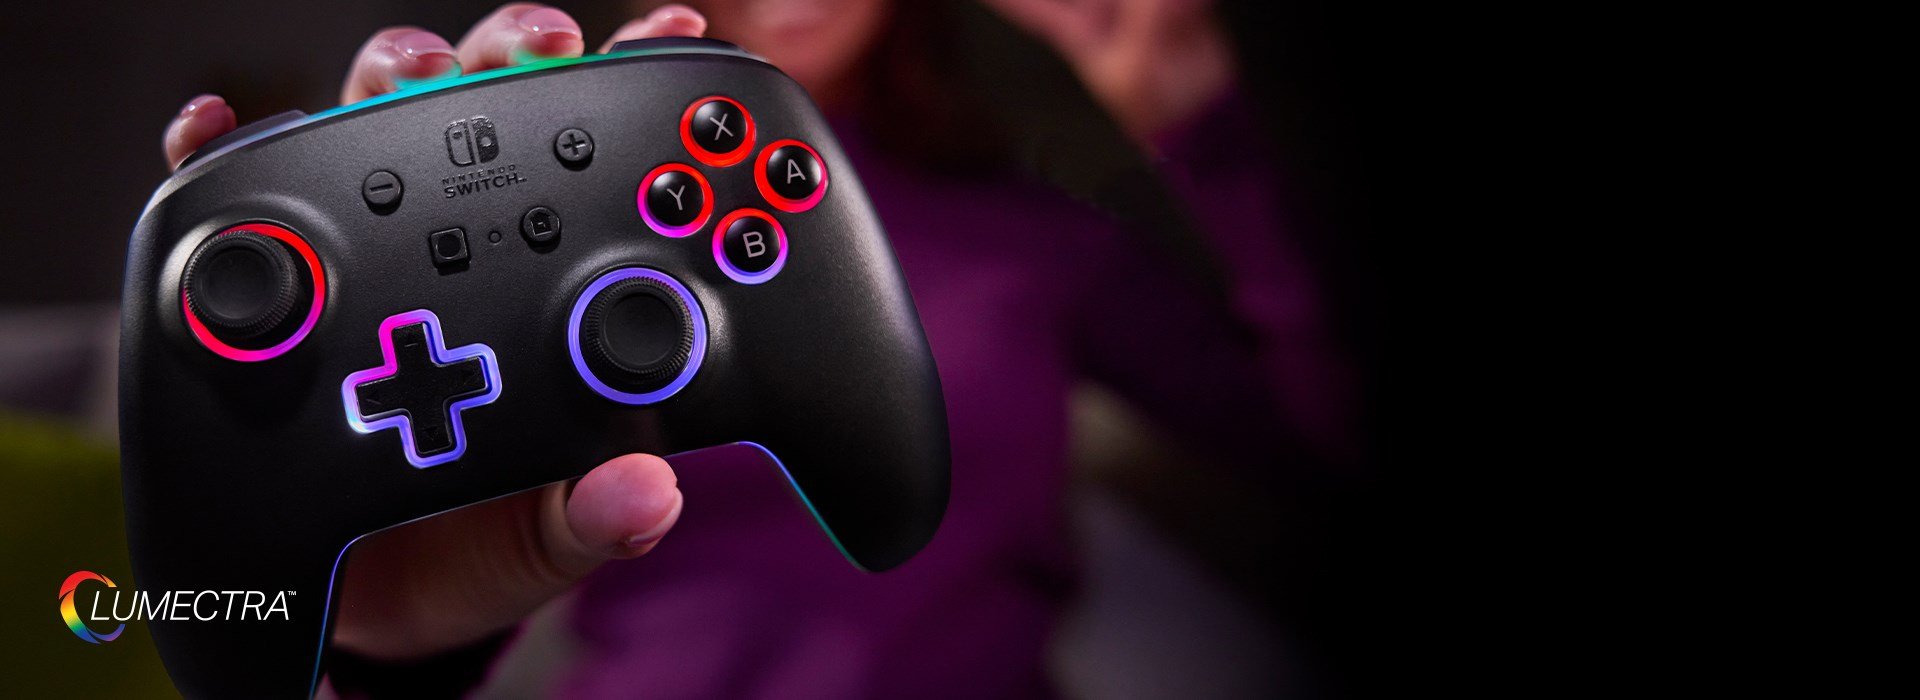 A hand gripping a glowing Lumectra controller holding it up to the camera